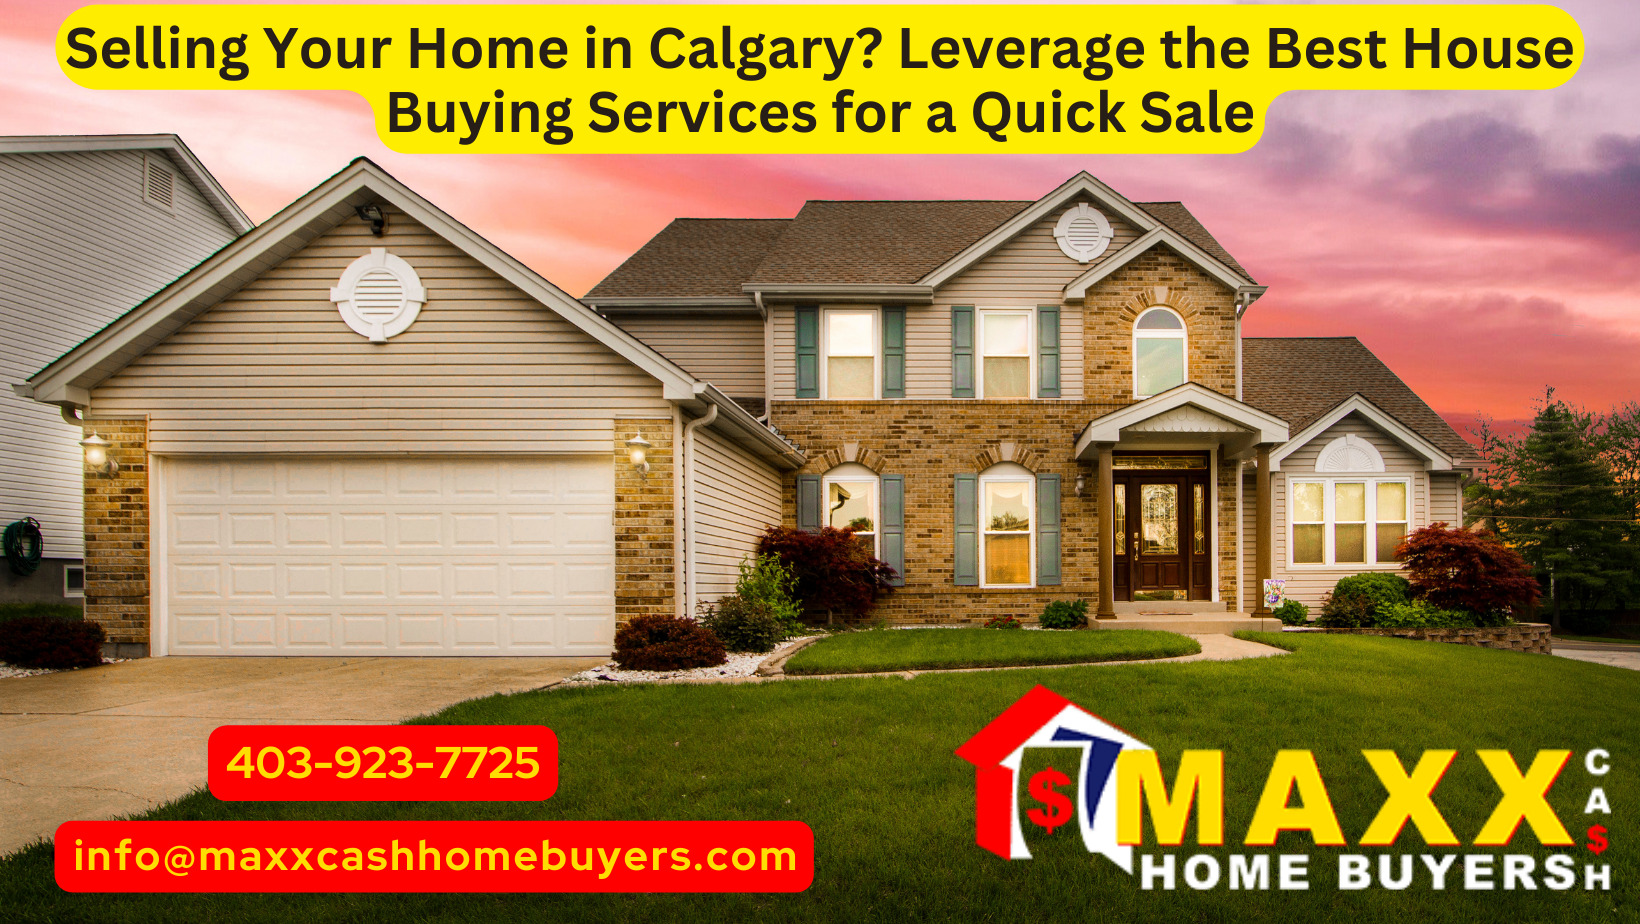 Selling Your Home in Calgary? Leverage the Best House Buying Services for a Quick Sale